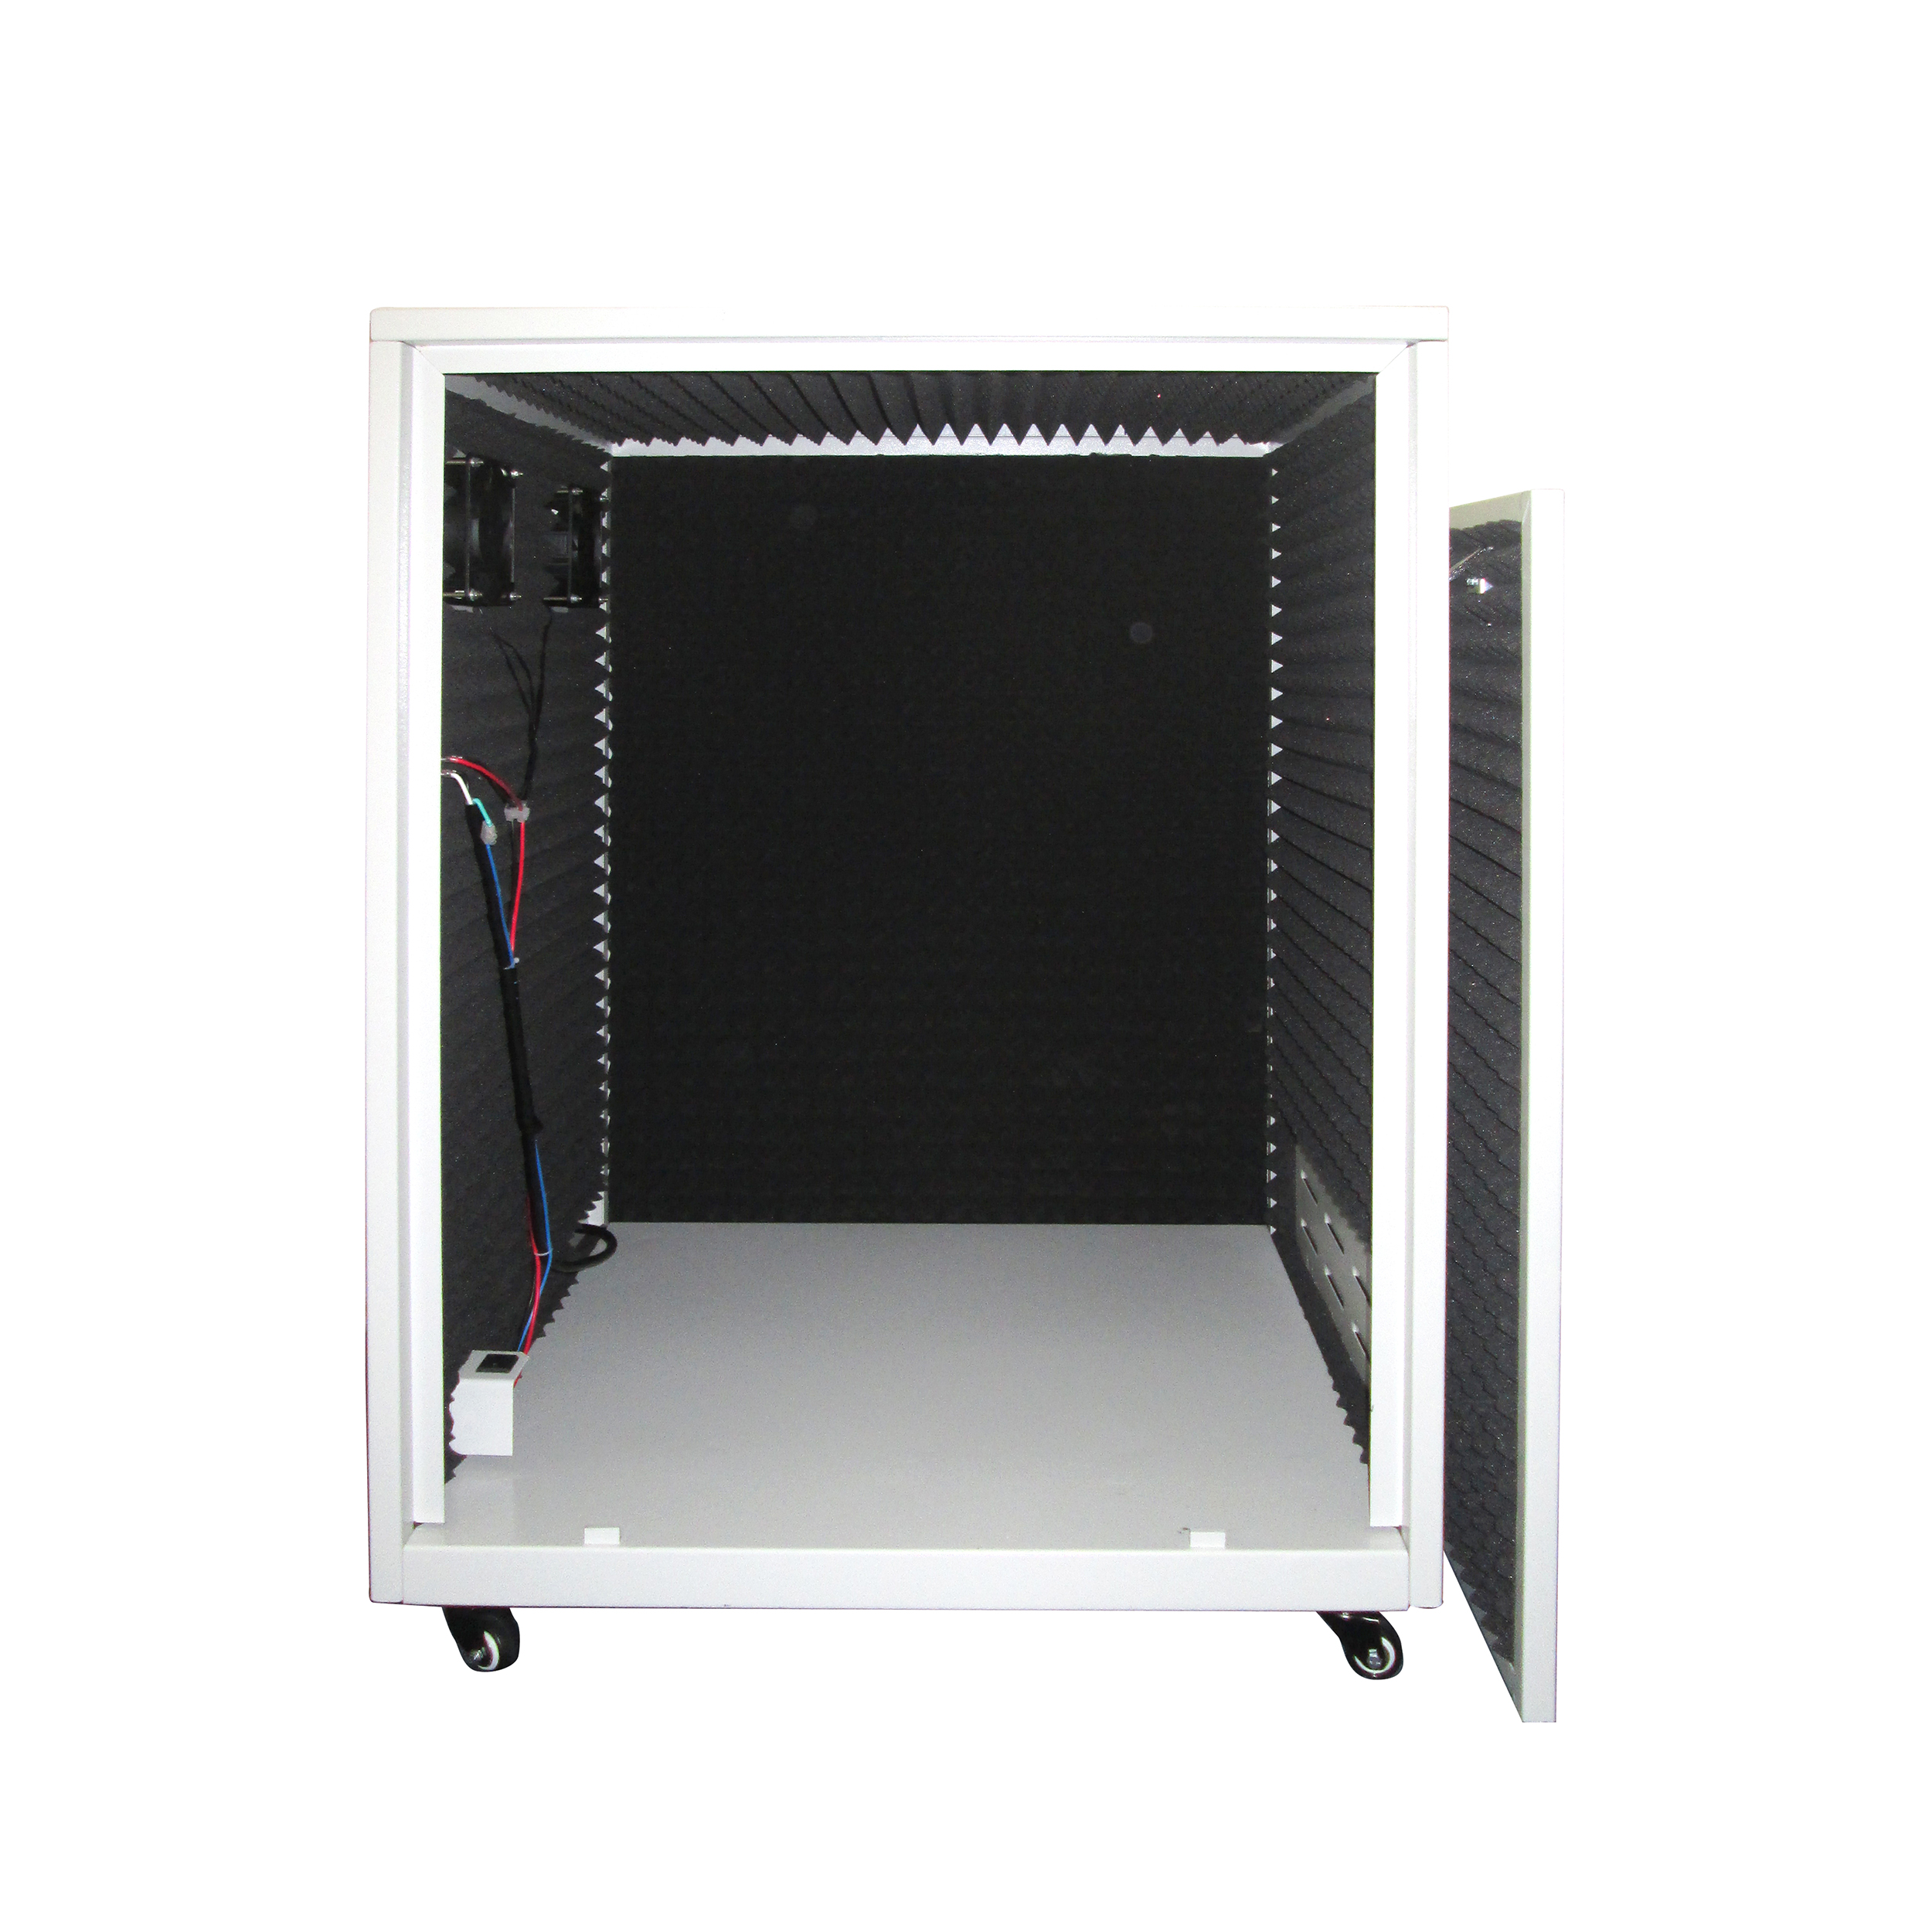 Spc03 Ultra Quiet Sound Proof Cabinet For Air Compressors